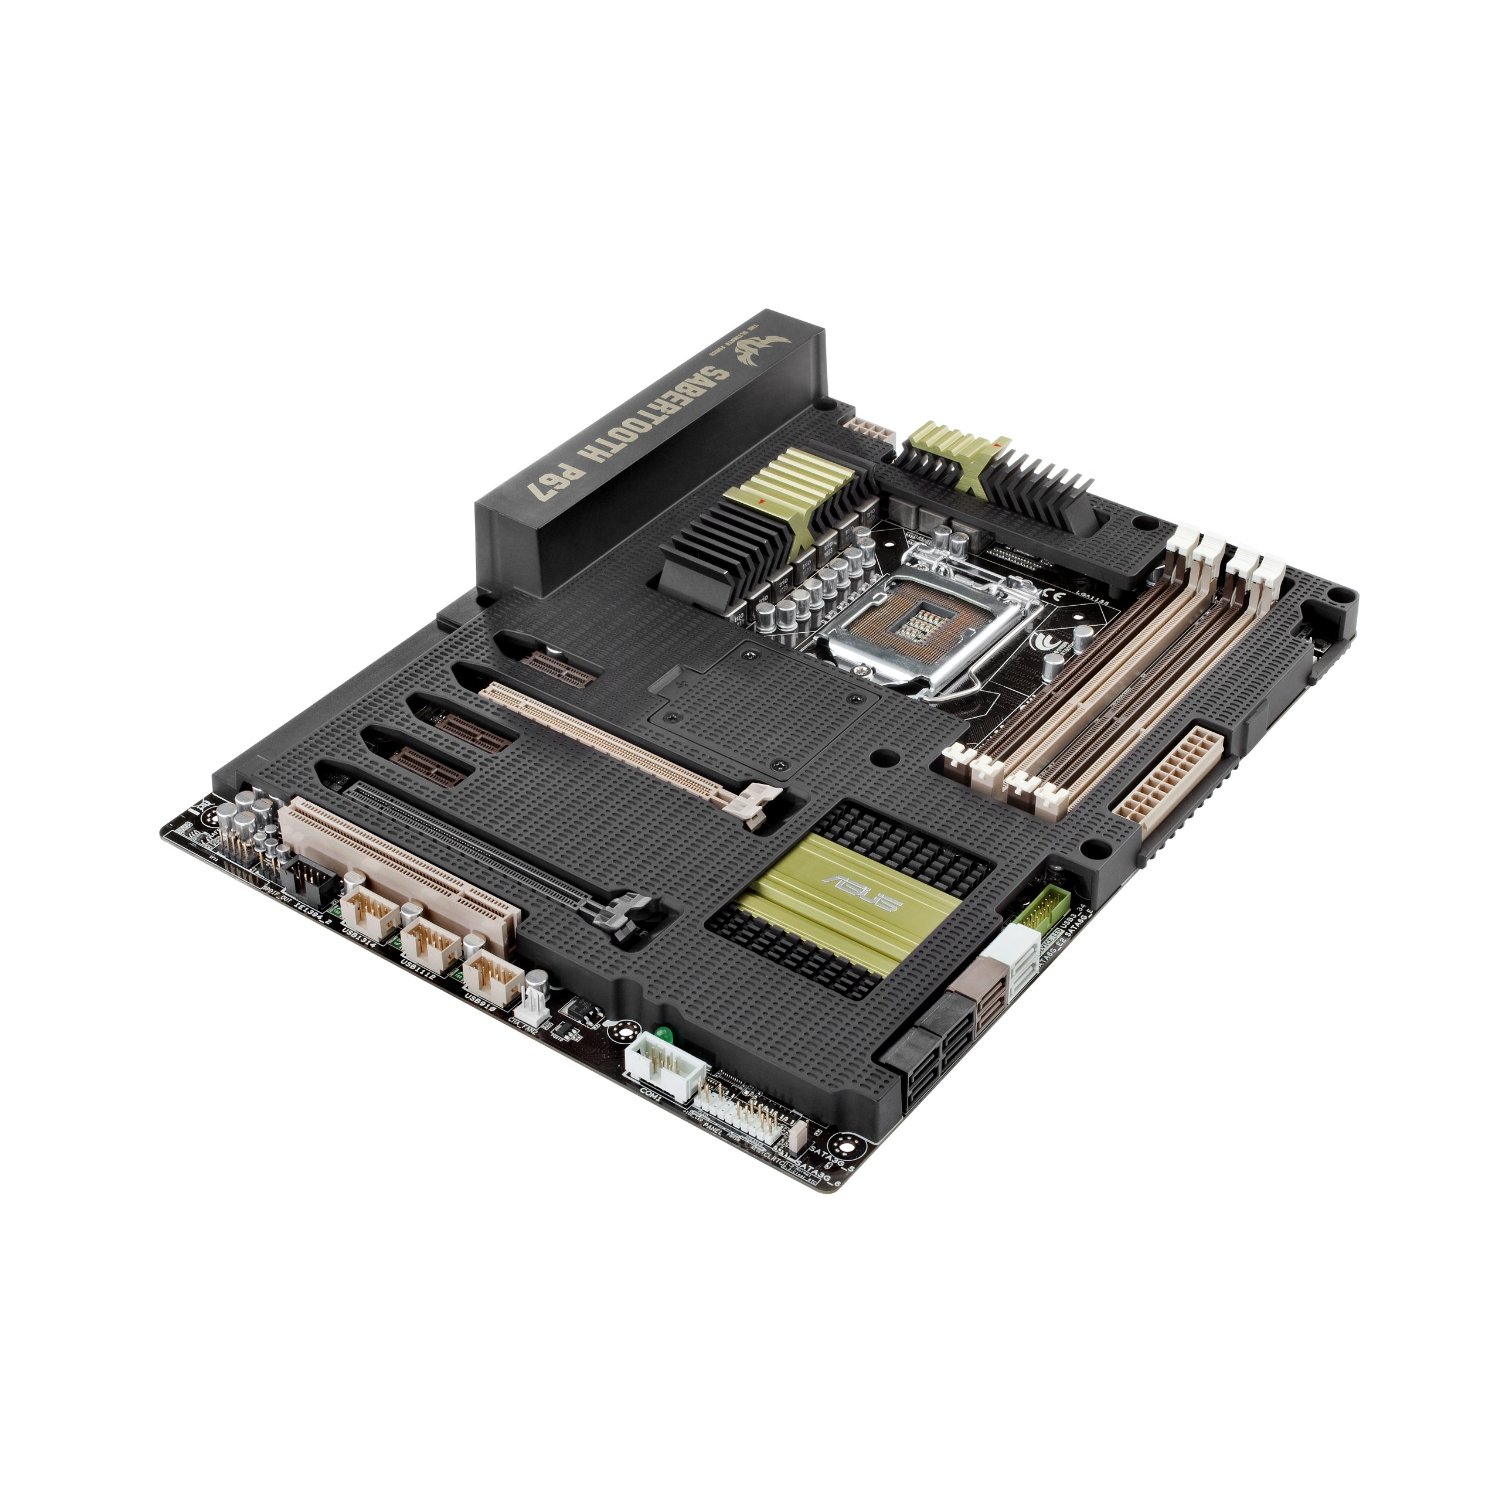 http://thetechjournal.com/wp-content/uploads/images/1108/1313504264-asus-sabertooth-p67-lga-1155-sata-6gbps-and-usb-30-supported-1800-atx-motherboard-3.jpg